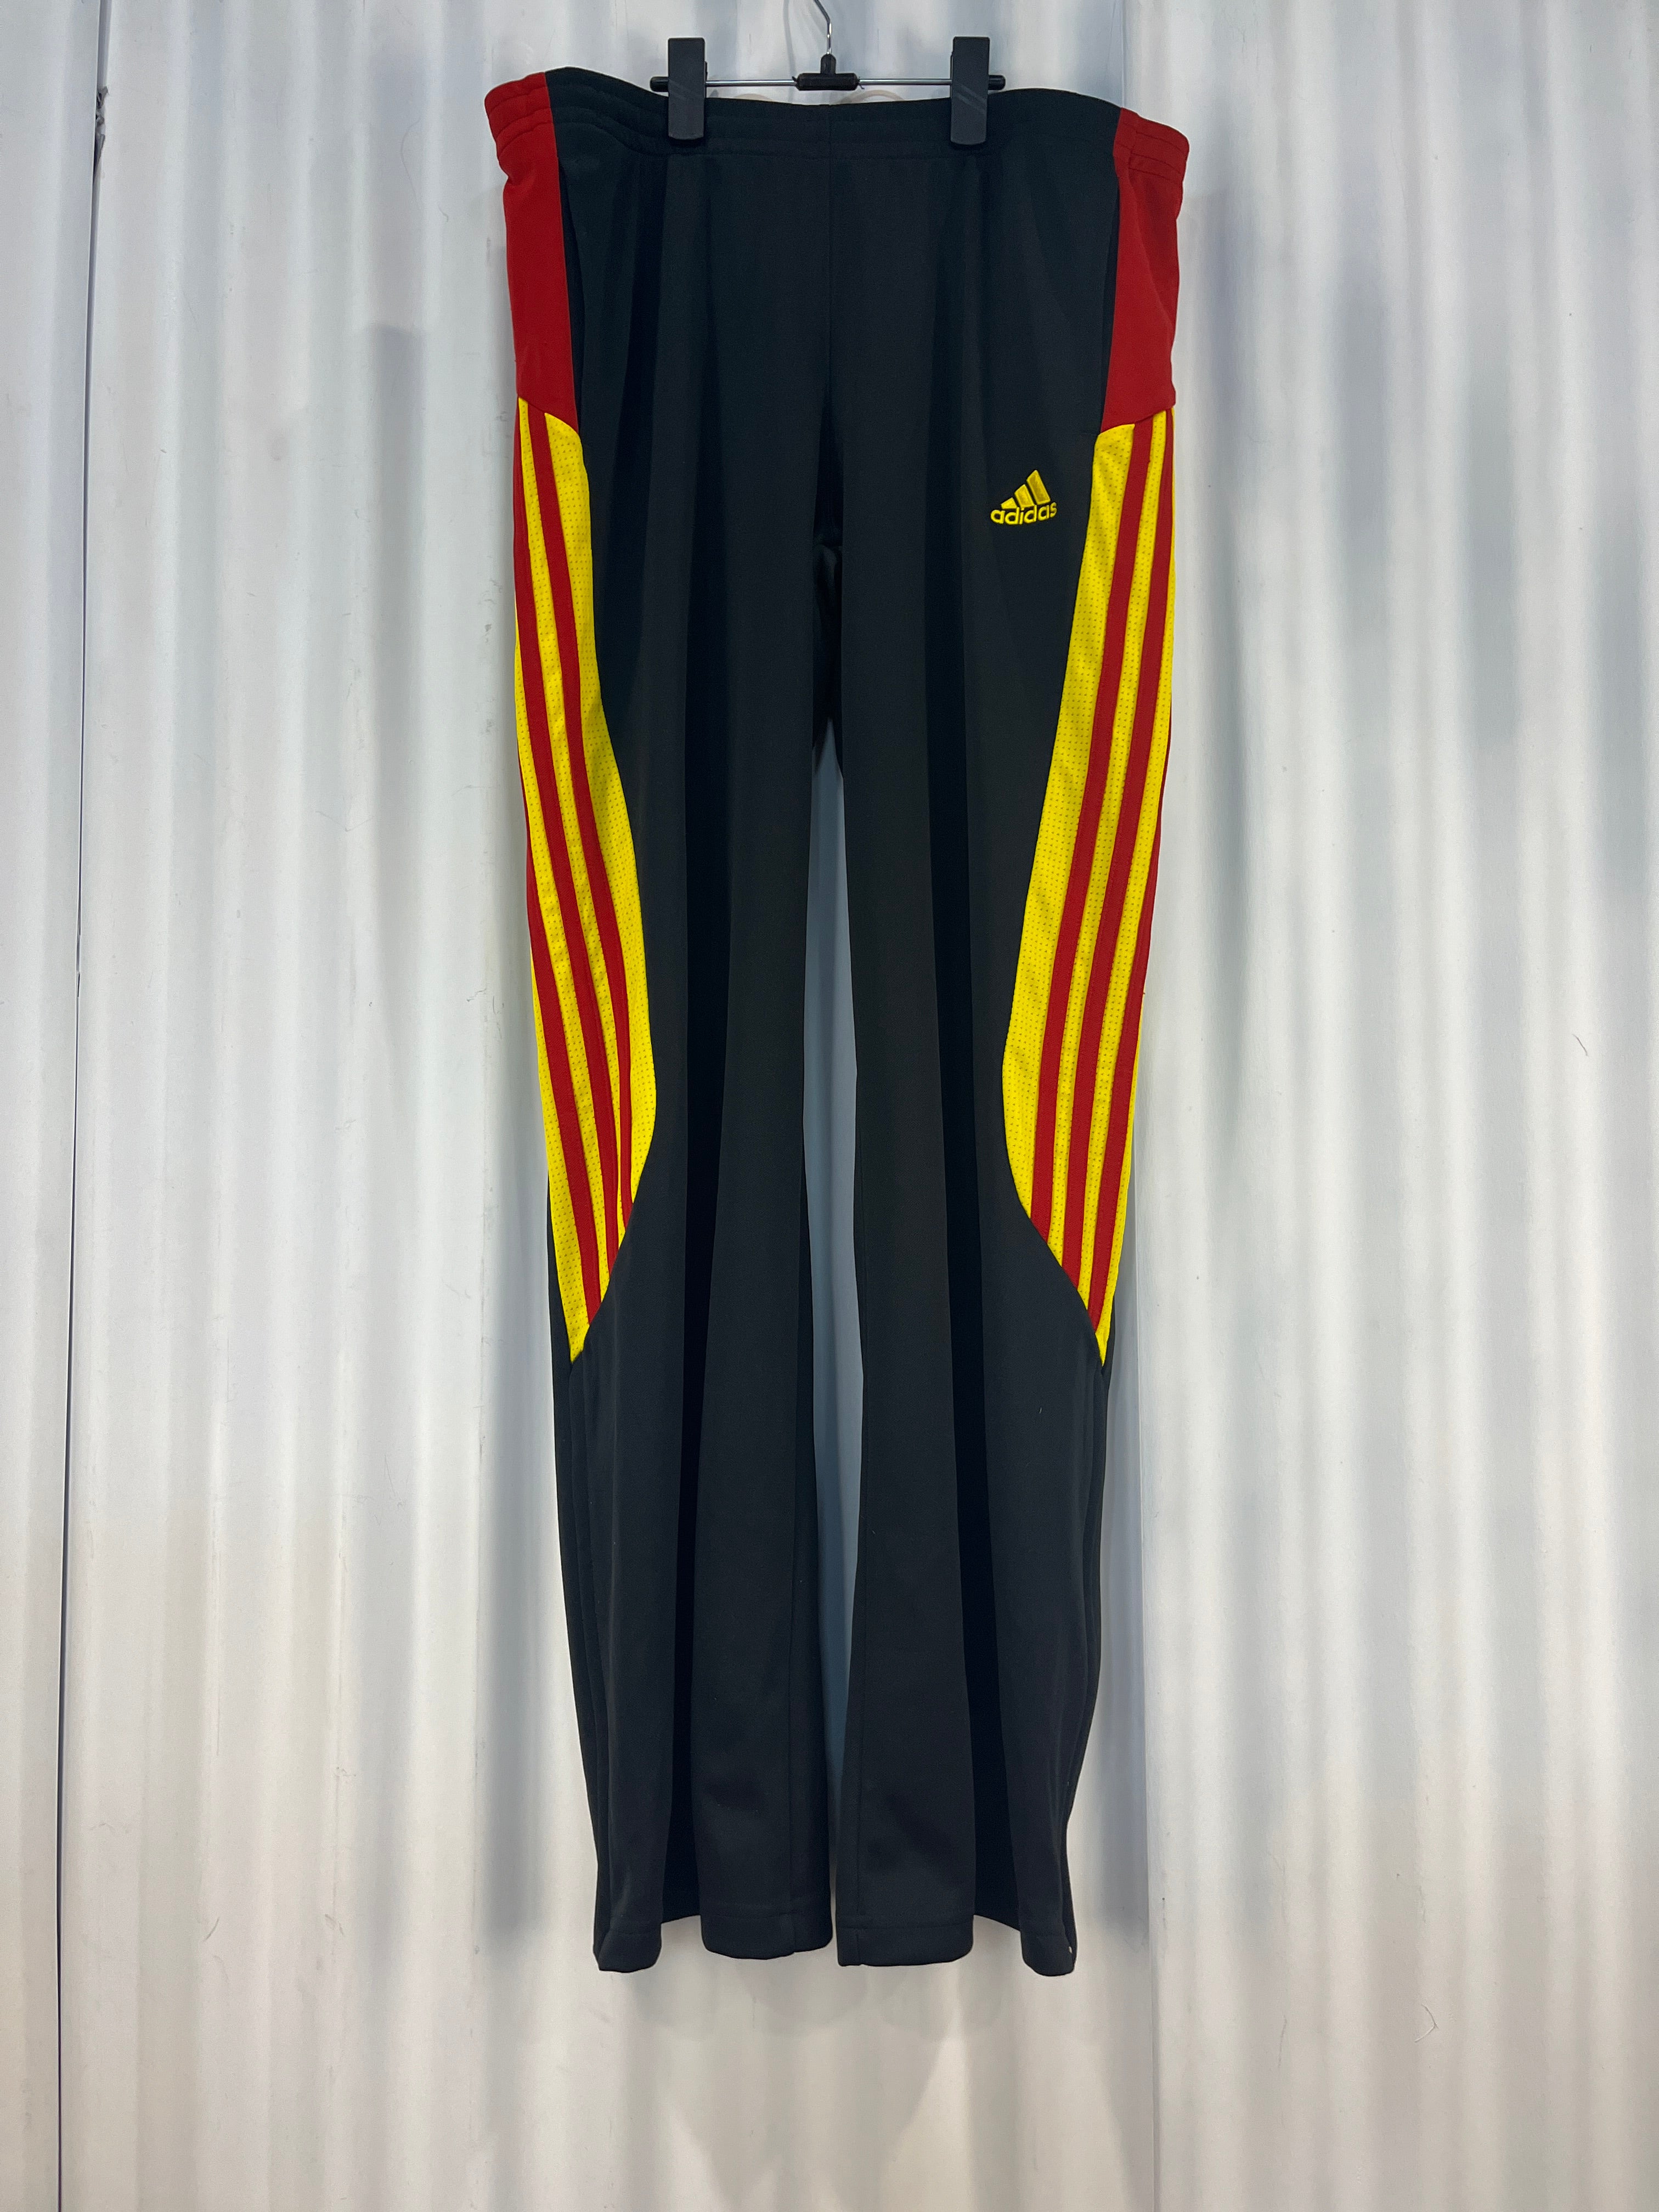 Adidas Climaproof Rojo Track Pants – The Locals Sale